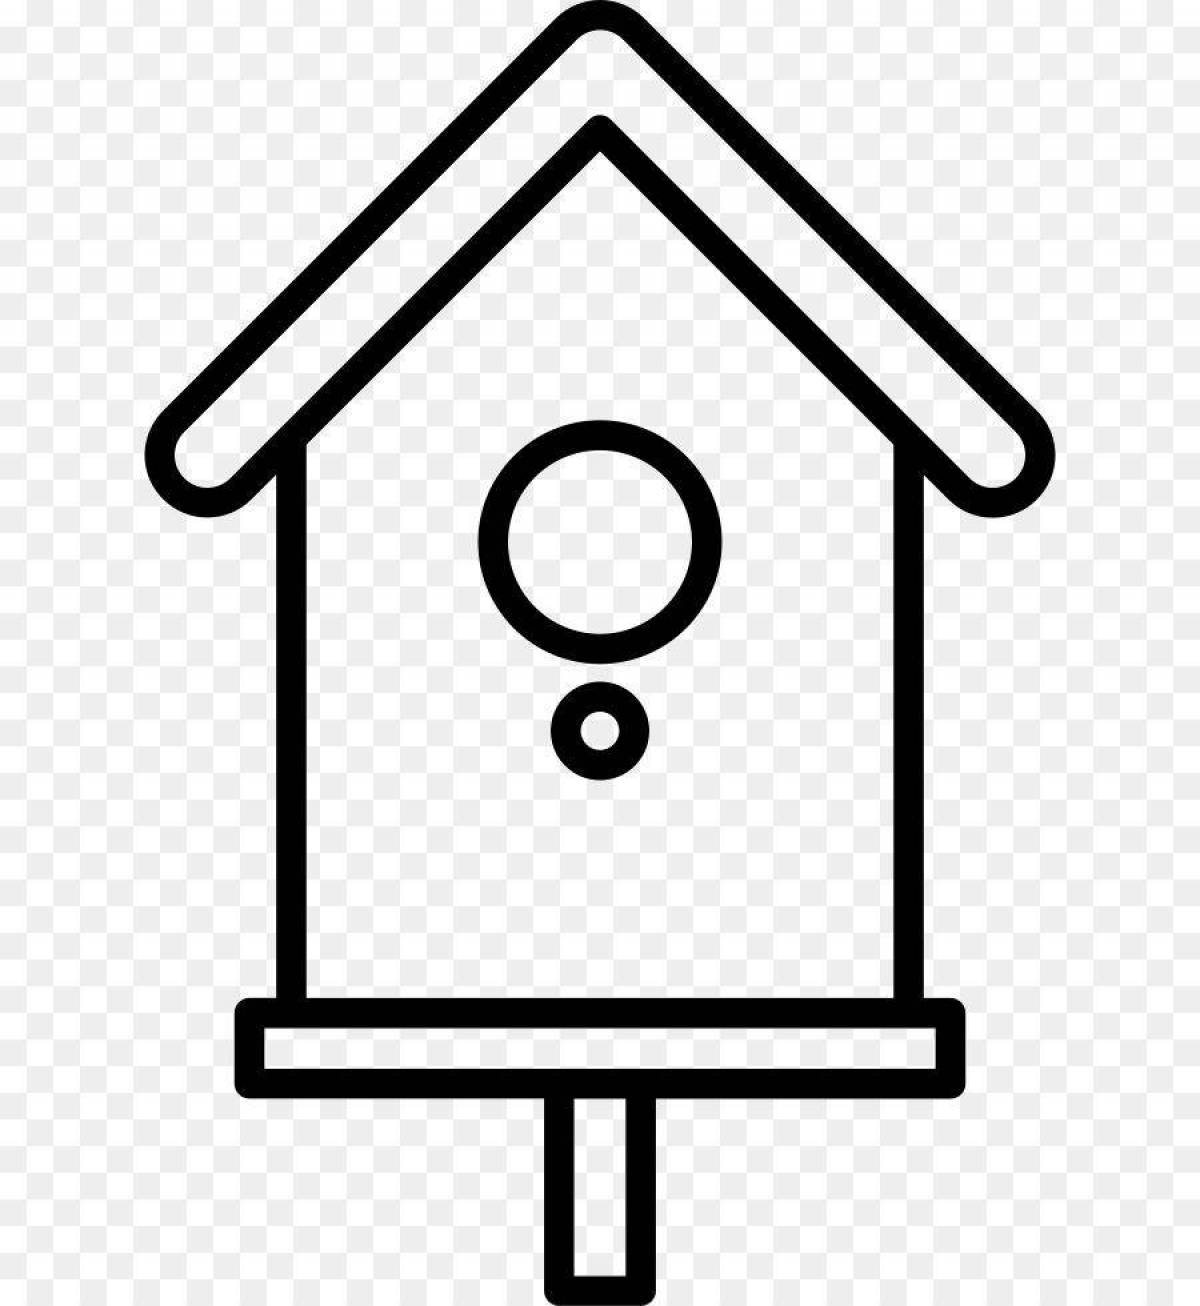 Awesome birdhouse coloring page